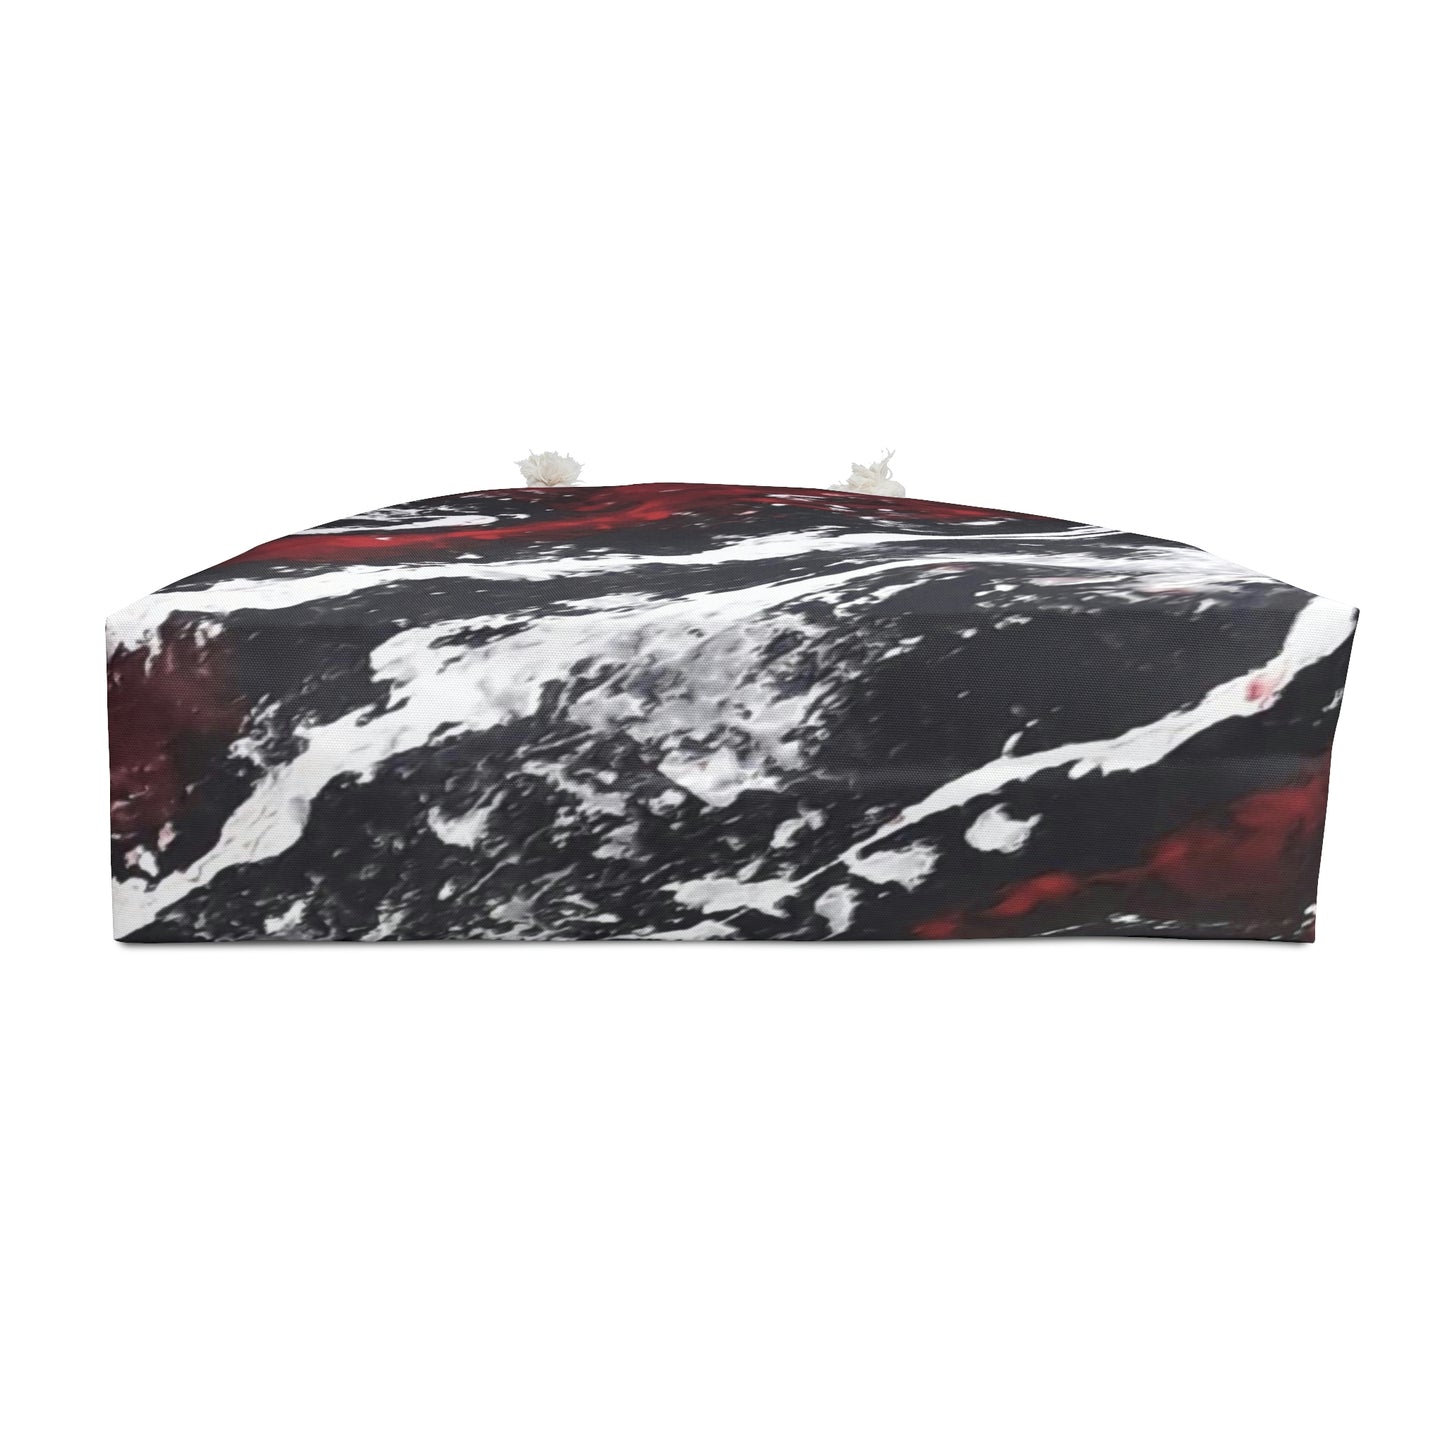 Abstract Weekender Bag - O By Onica Online Store